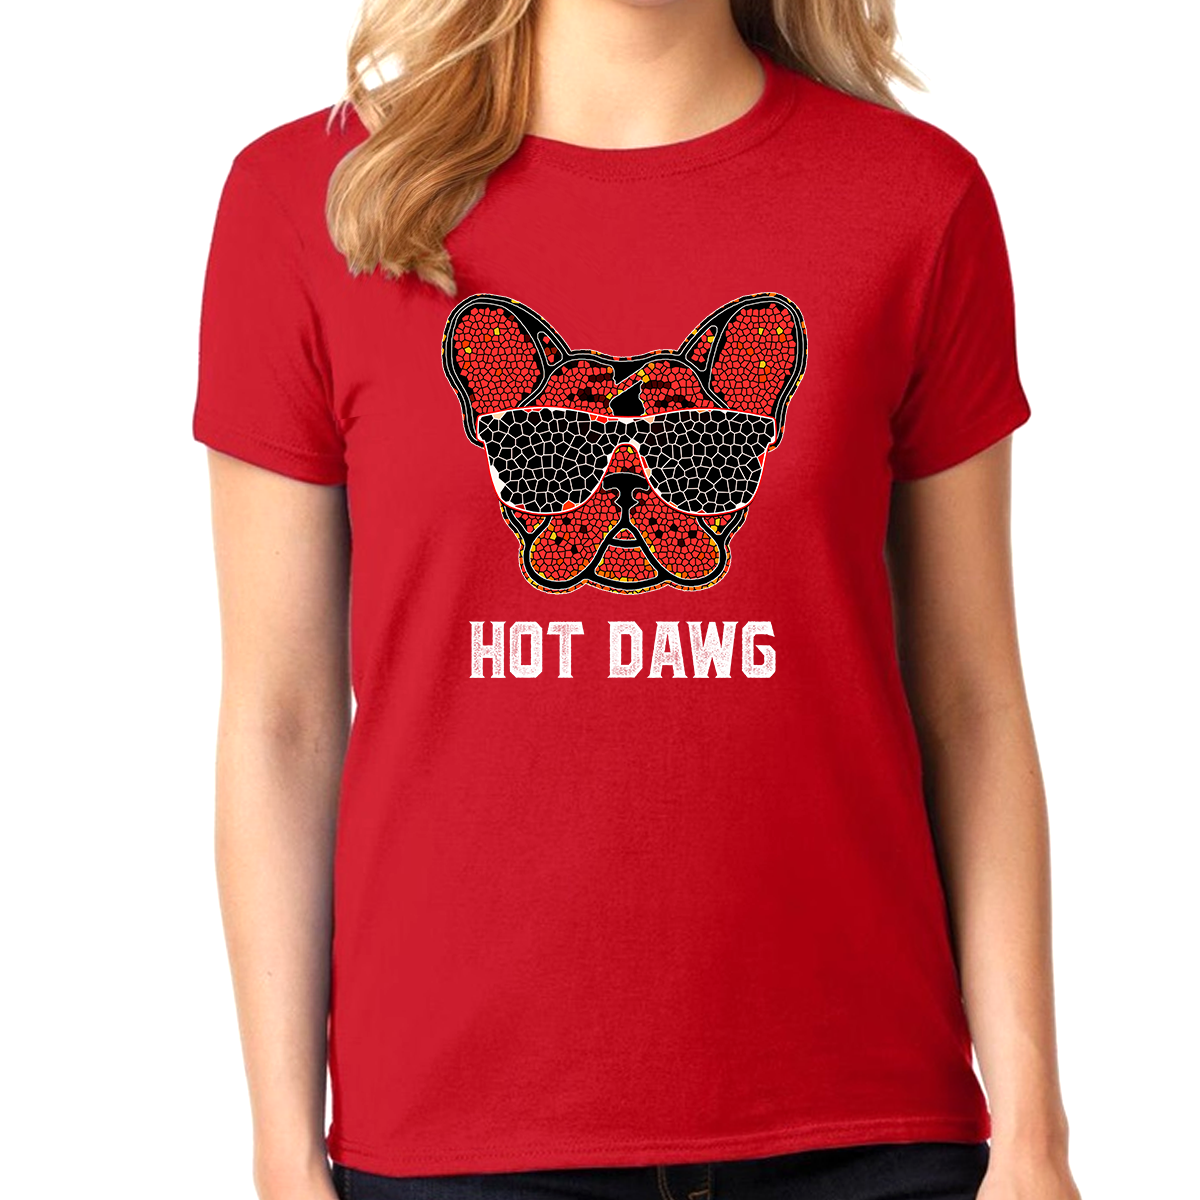 Hot Dog Shirt - Red Dog Shirts for Girls - Dog Gifts for Girls - Kids Dog Lover Shirts - Fire Fit Designs